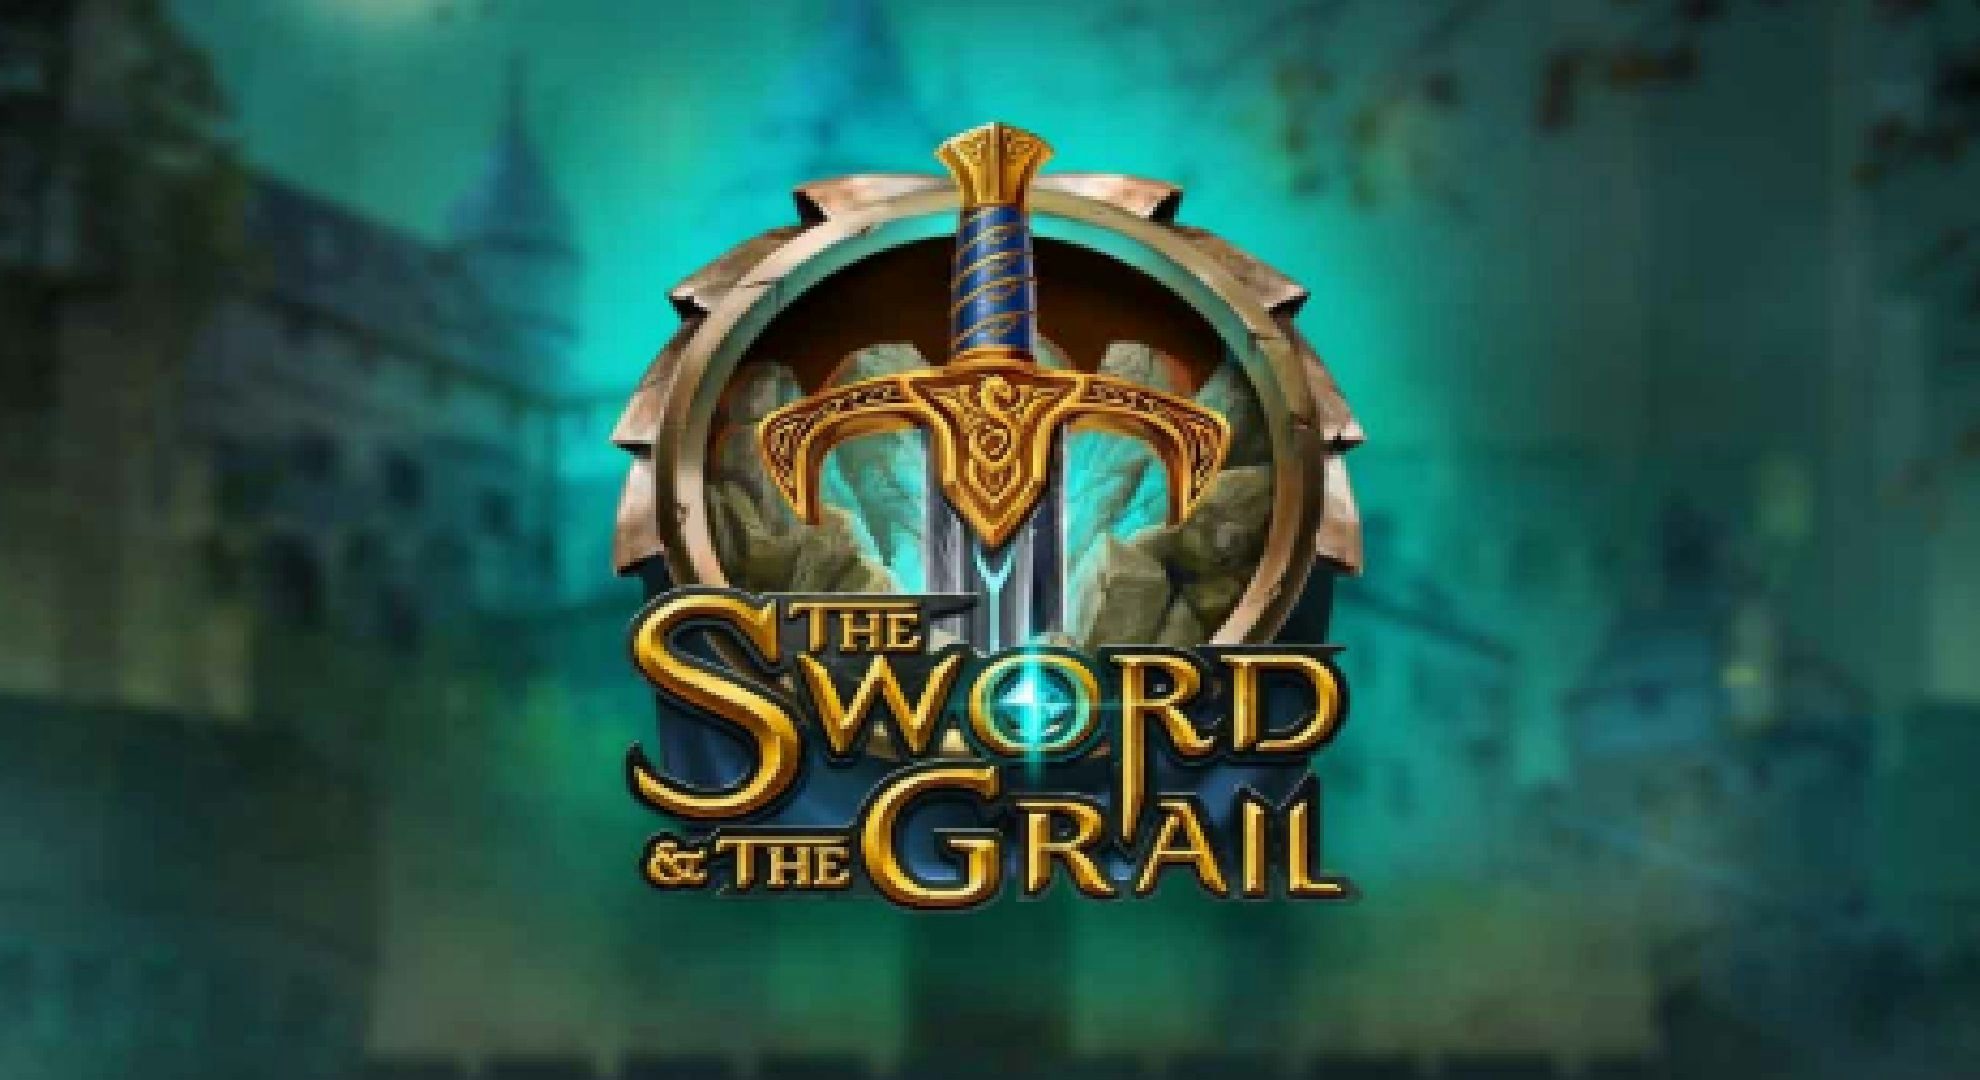 The Sword and The Grail